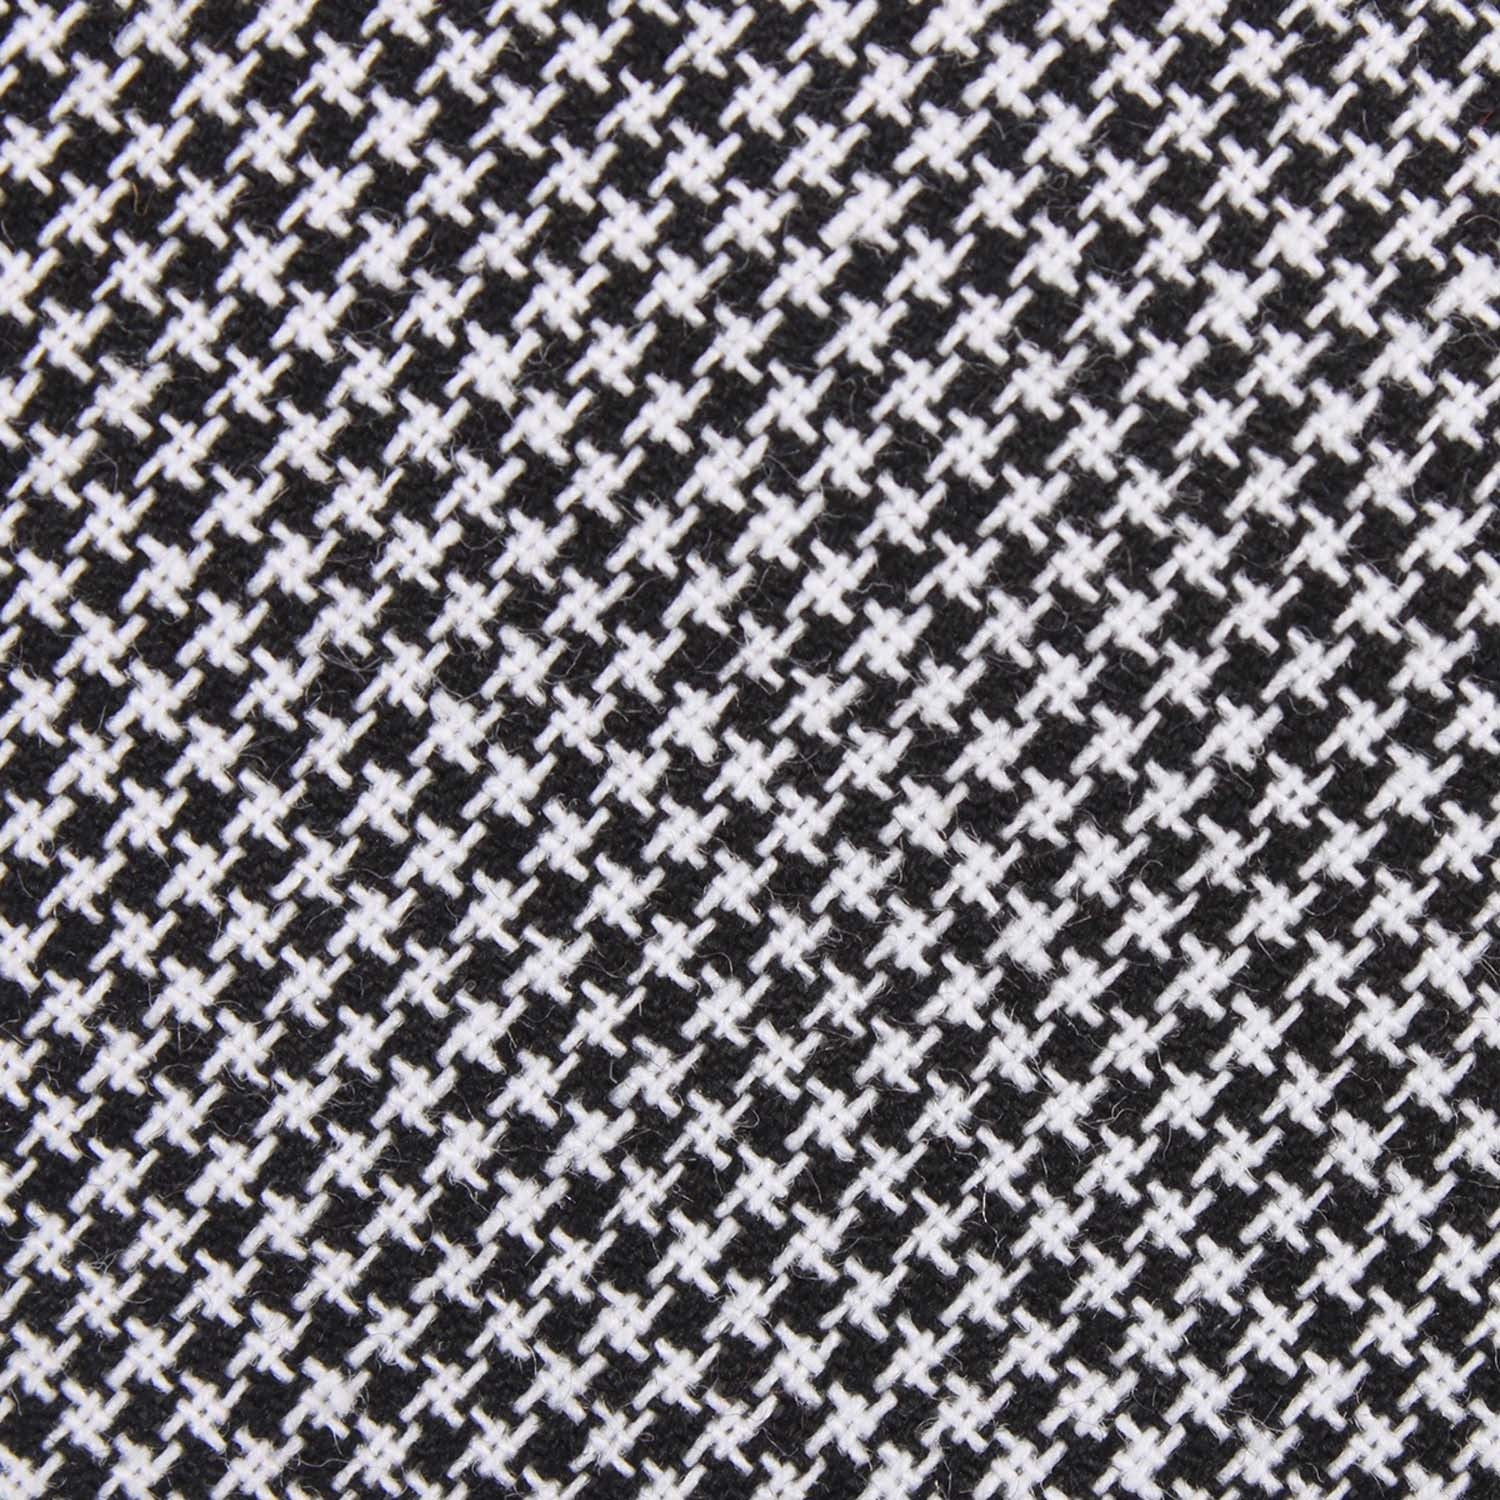 Black & White Houndstooth Cotton Fabric Bow Tie C164